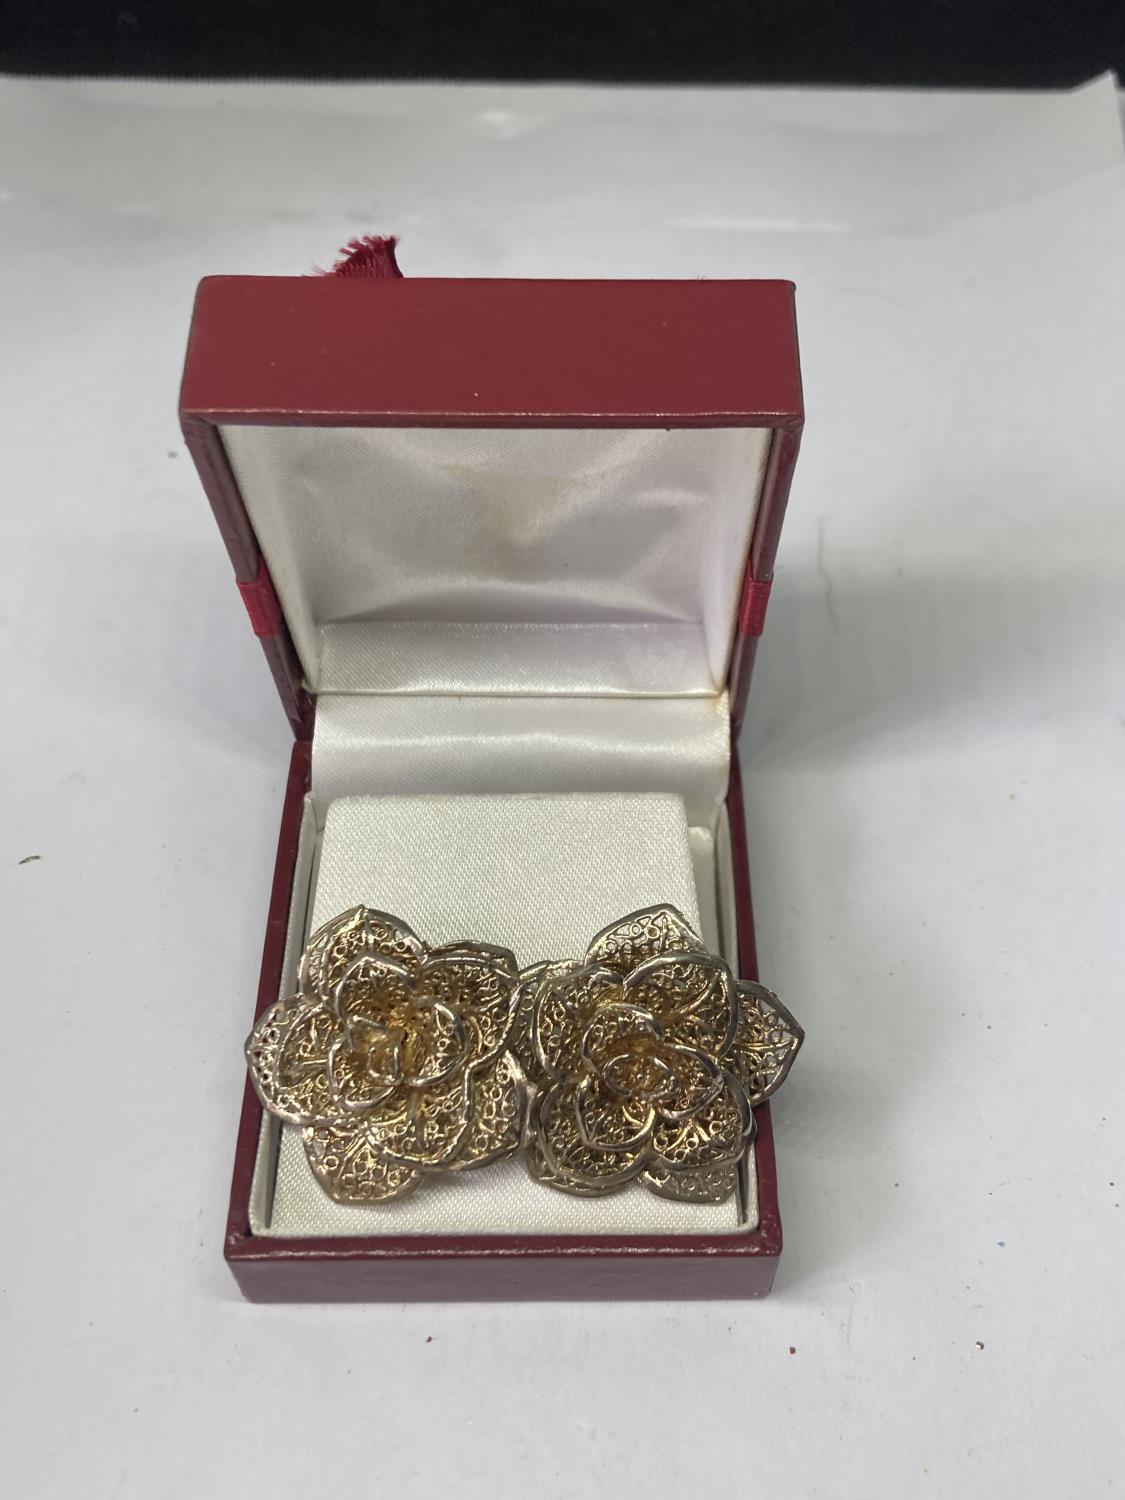 A PAIR OF SILVER EARRINGS IN A PRESENTATION BOX